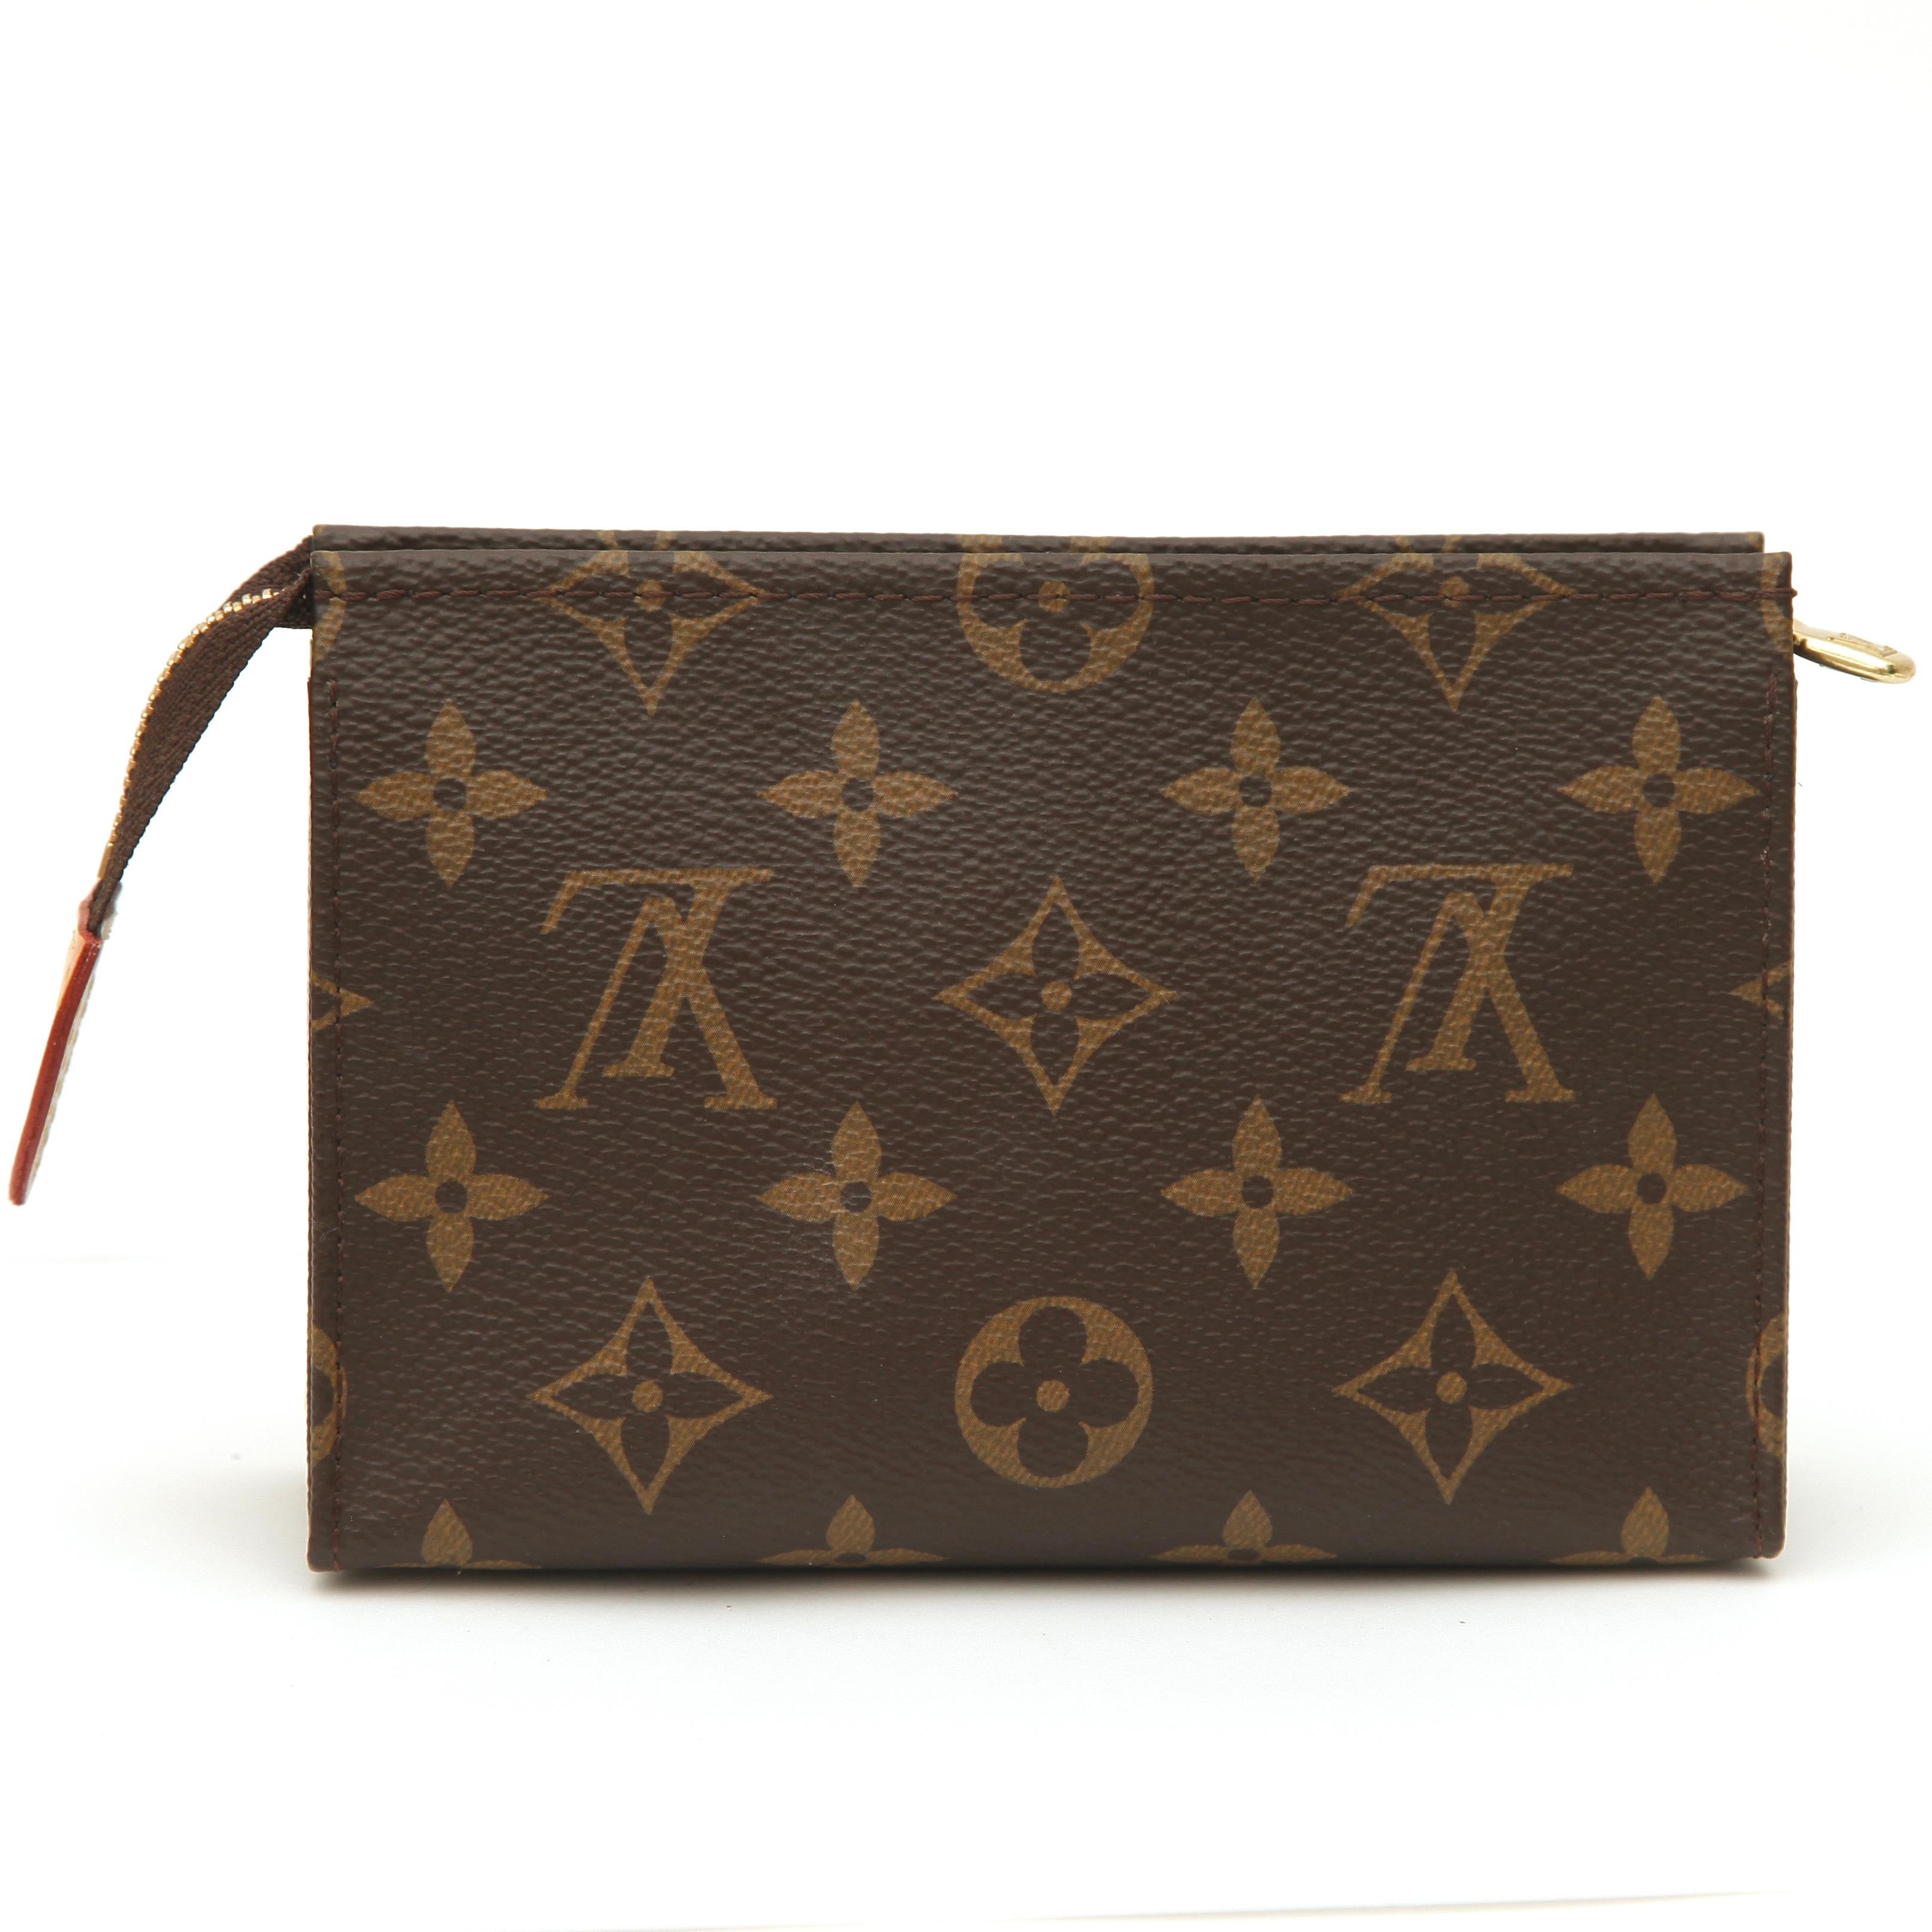 GUARANTEED AUTHENTIC LOUIS VUITTON MONOGRAM TOILETRY POUCH 15


Design: 
  - Brown monogram canvas exterior.
   - Brass top zipper closure.
  - Beige interior.
  - Interior one main compartment.
  - Signature leather plaque at the end of the